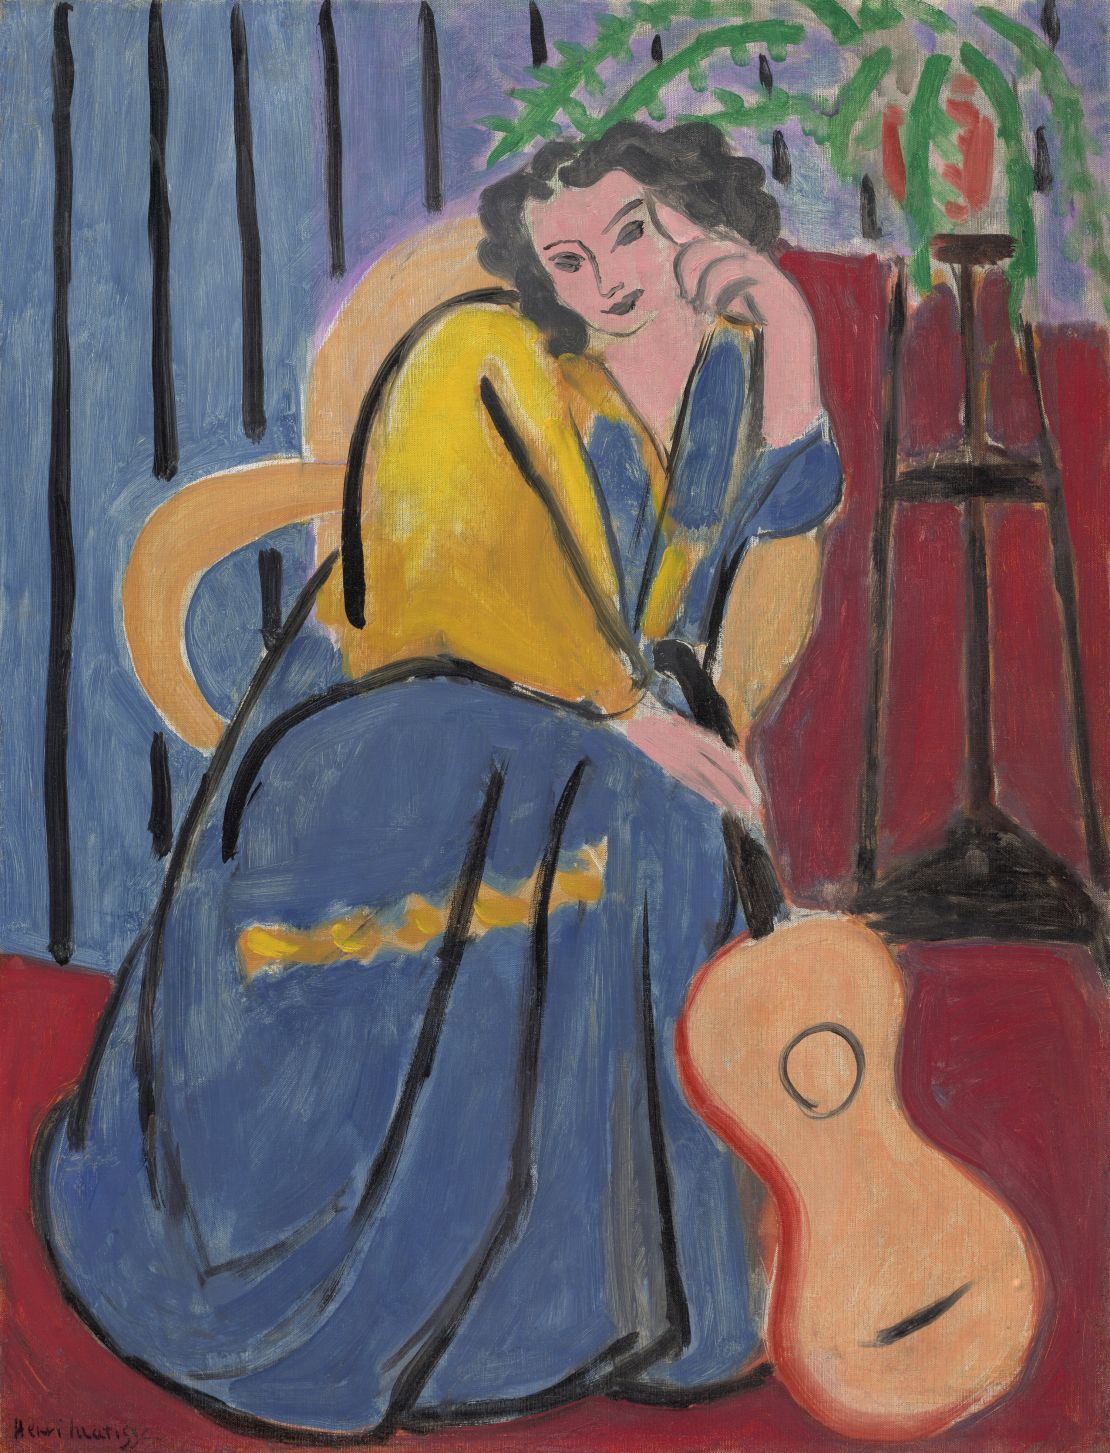 Henri Matisse's "Girl in Yellow and Blue with Guitar" from 1939 will be on show at the Jewish Museum's show "Afterlives." 